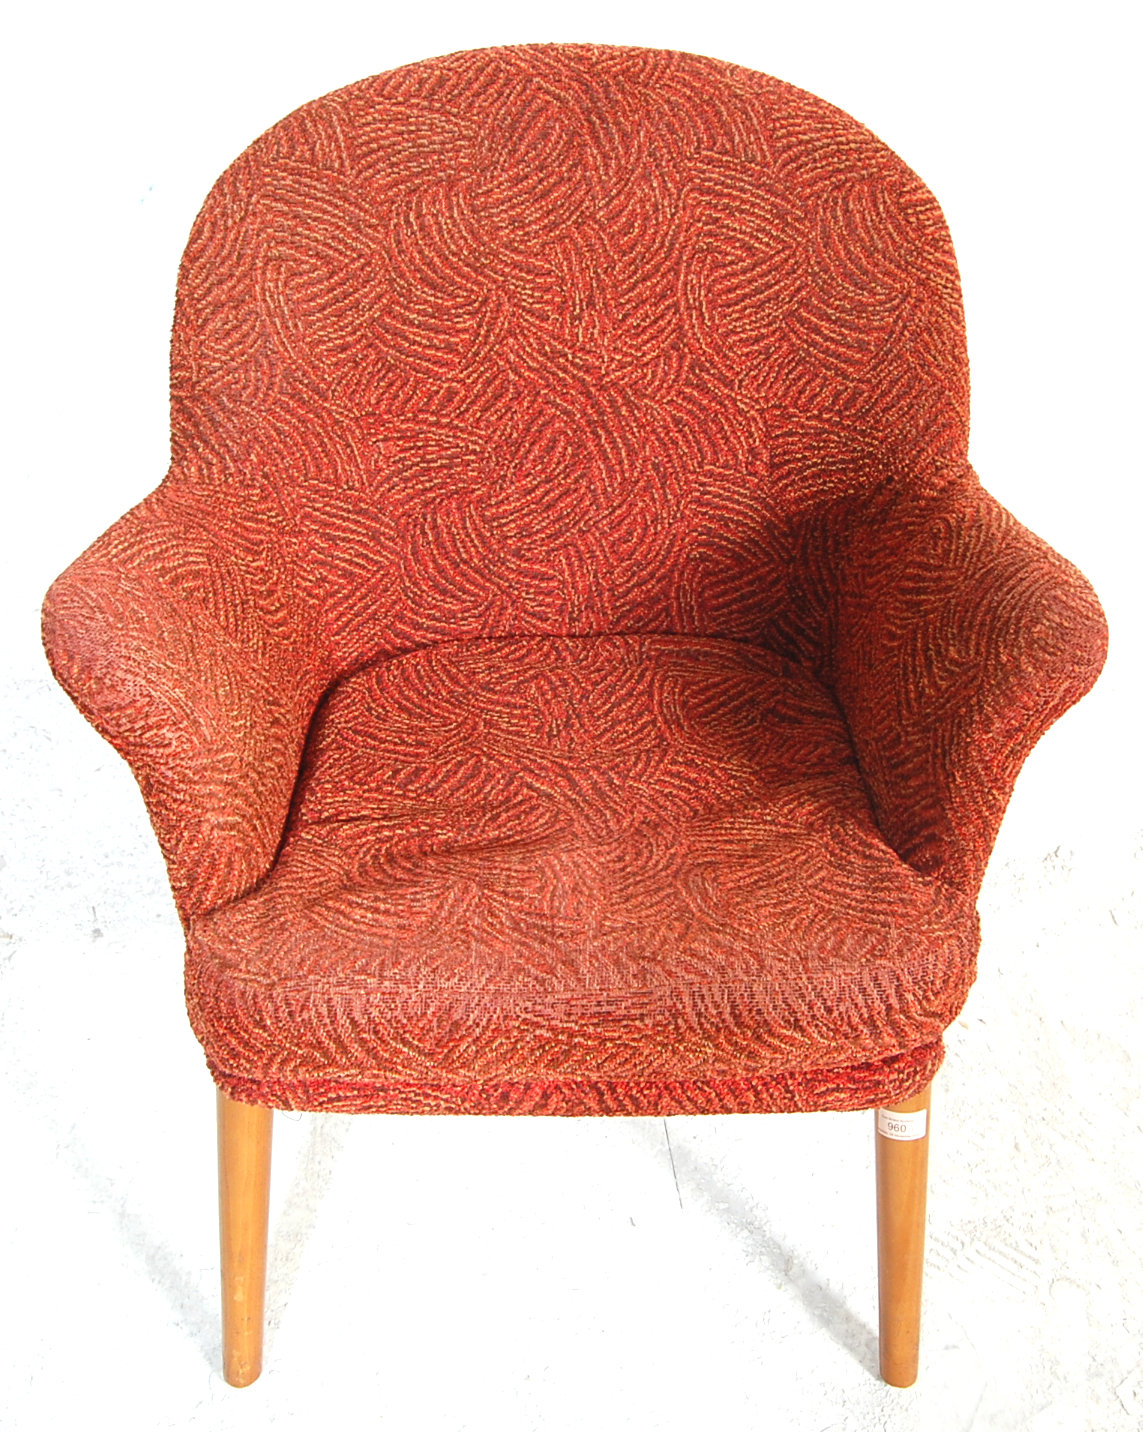 VINTAGE 20TH CENTURY TUB CHAIR WITH RED UPHOLSTERY AND TURNED SUPPORTS - Image 3 of 4